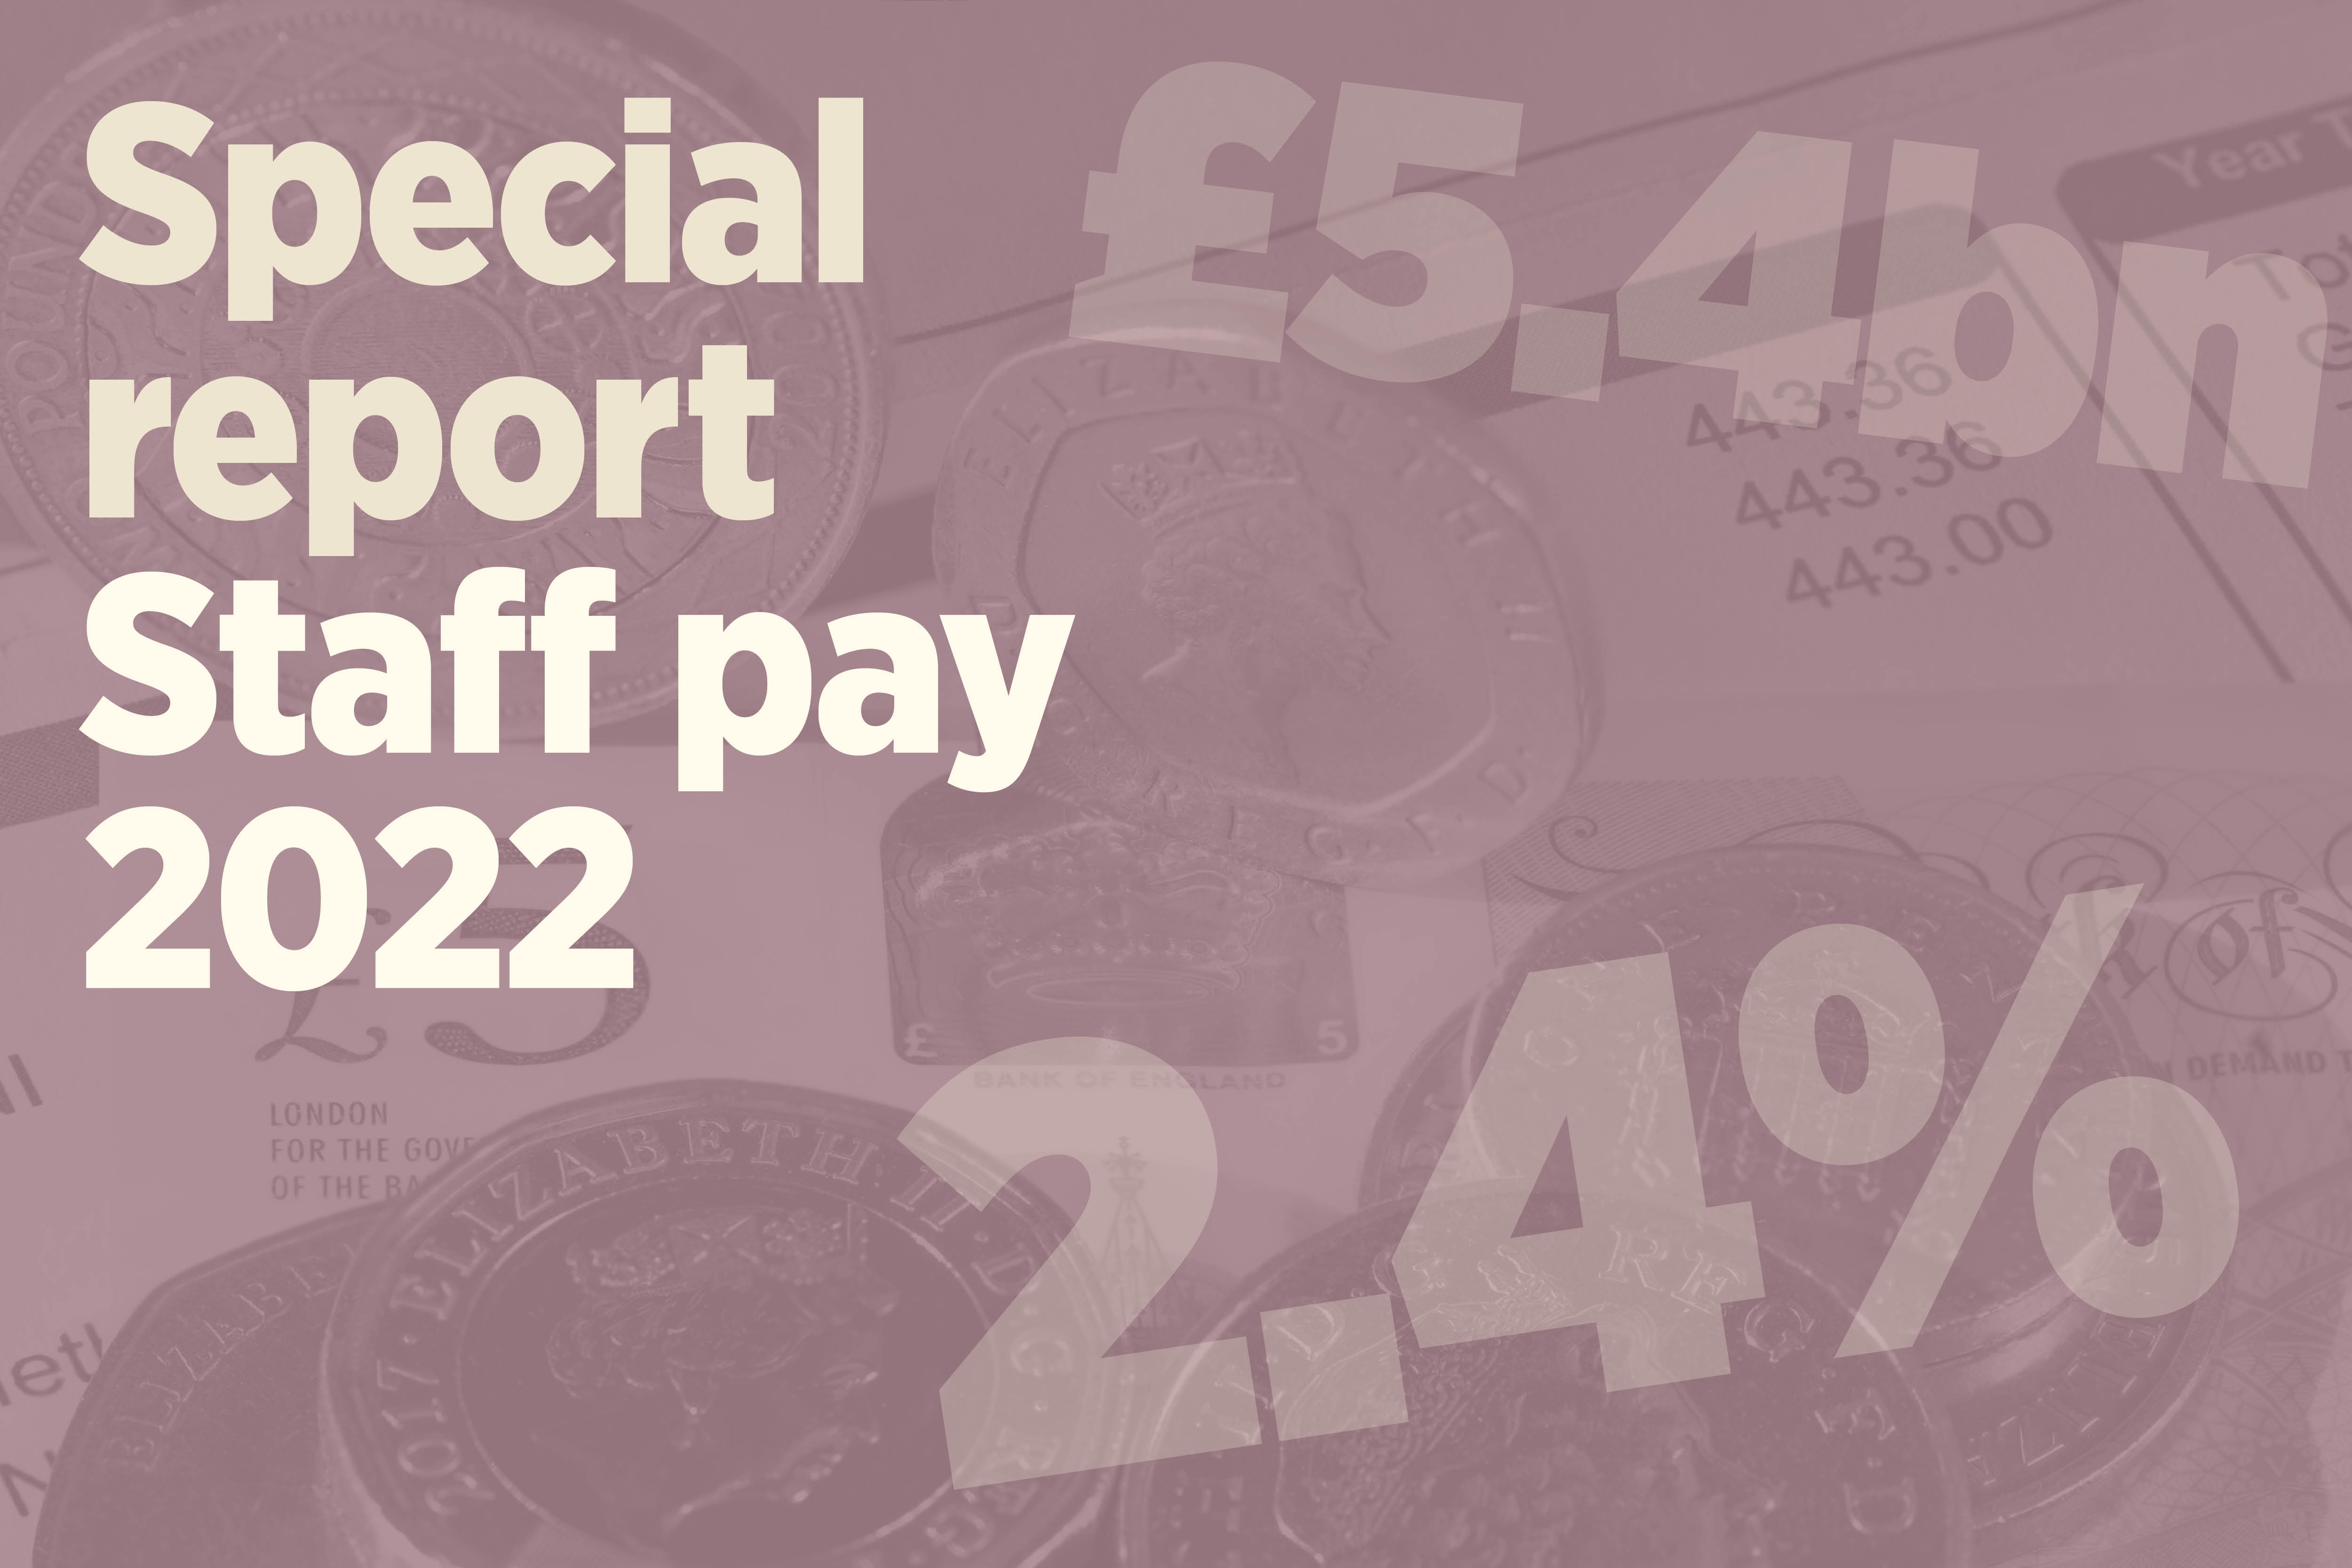 Special report: average staff pay rises 2.4% across UK HAs